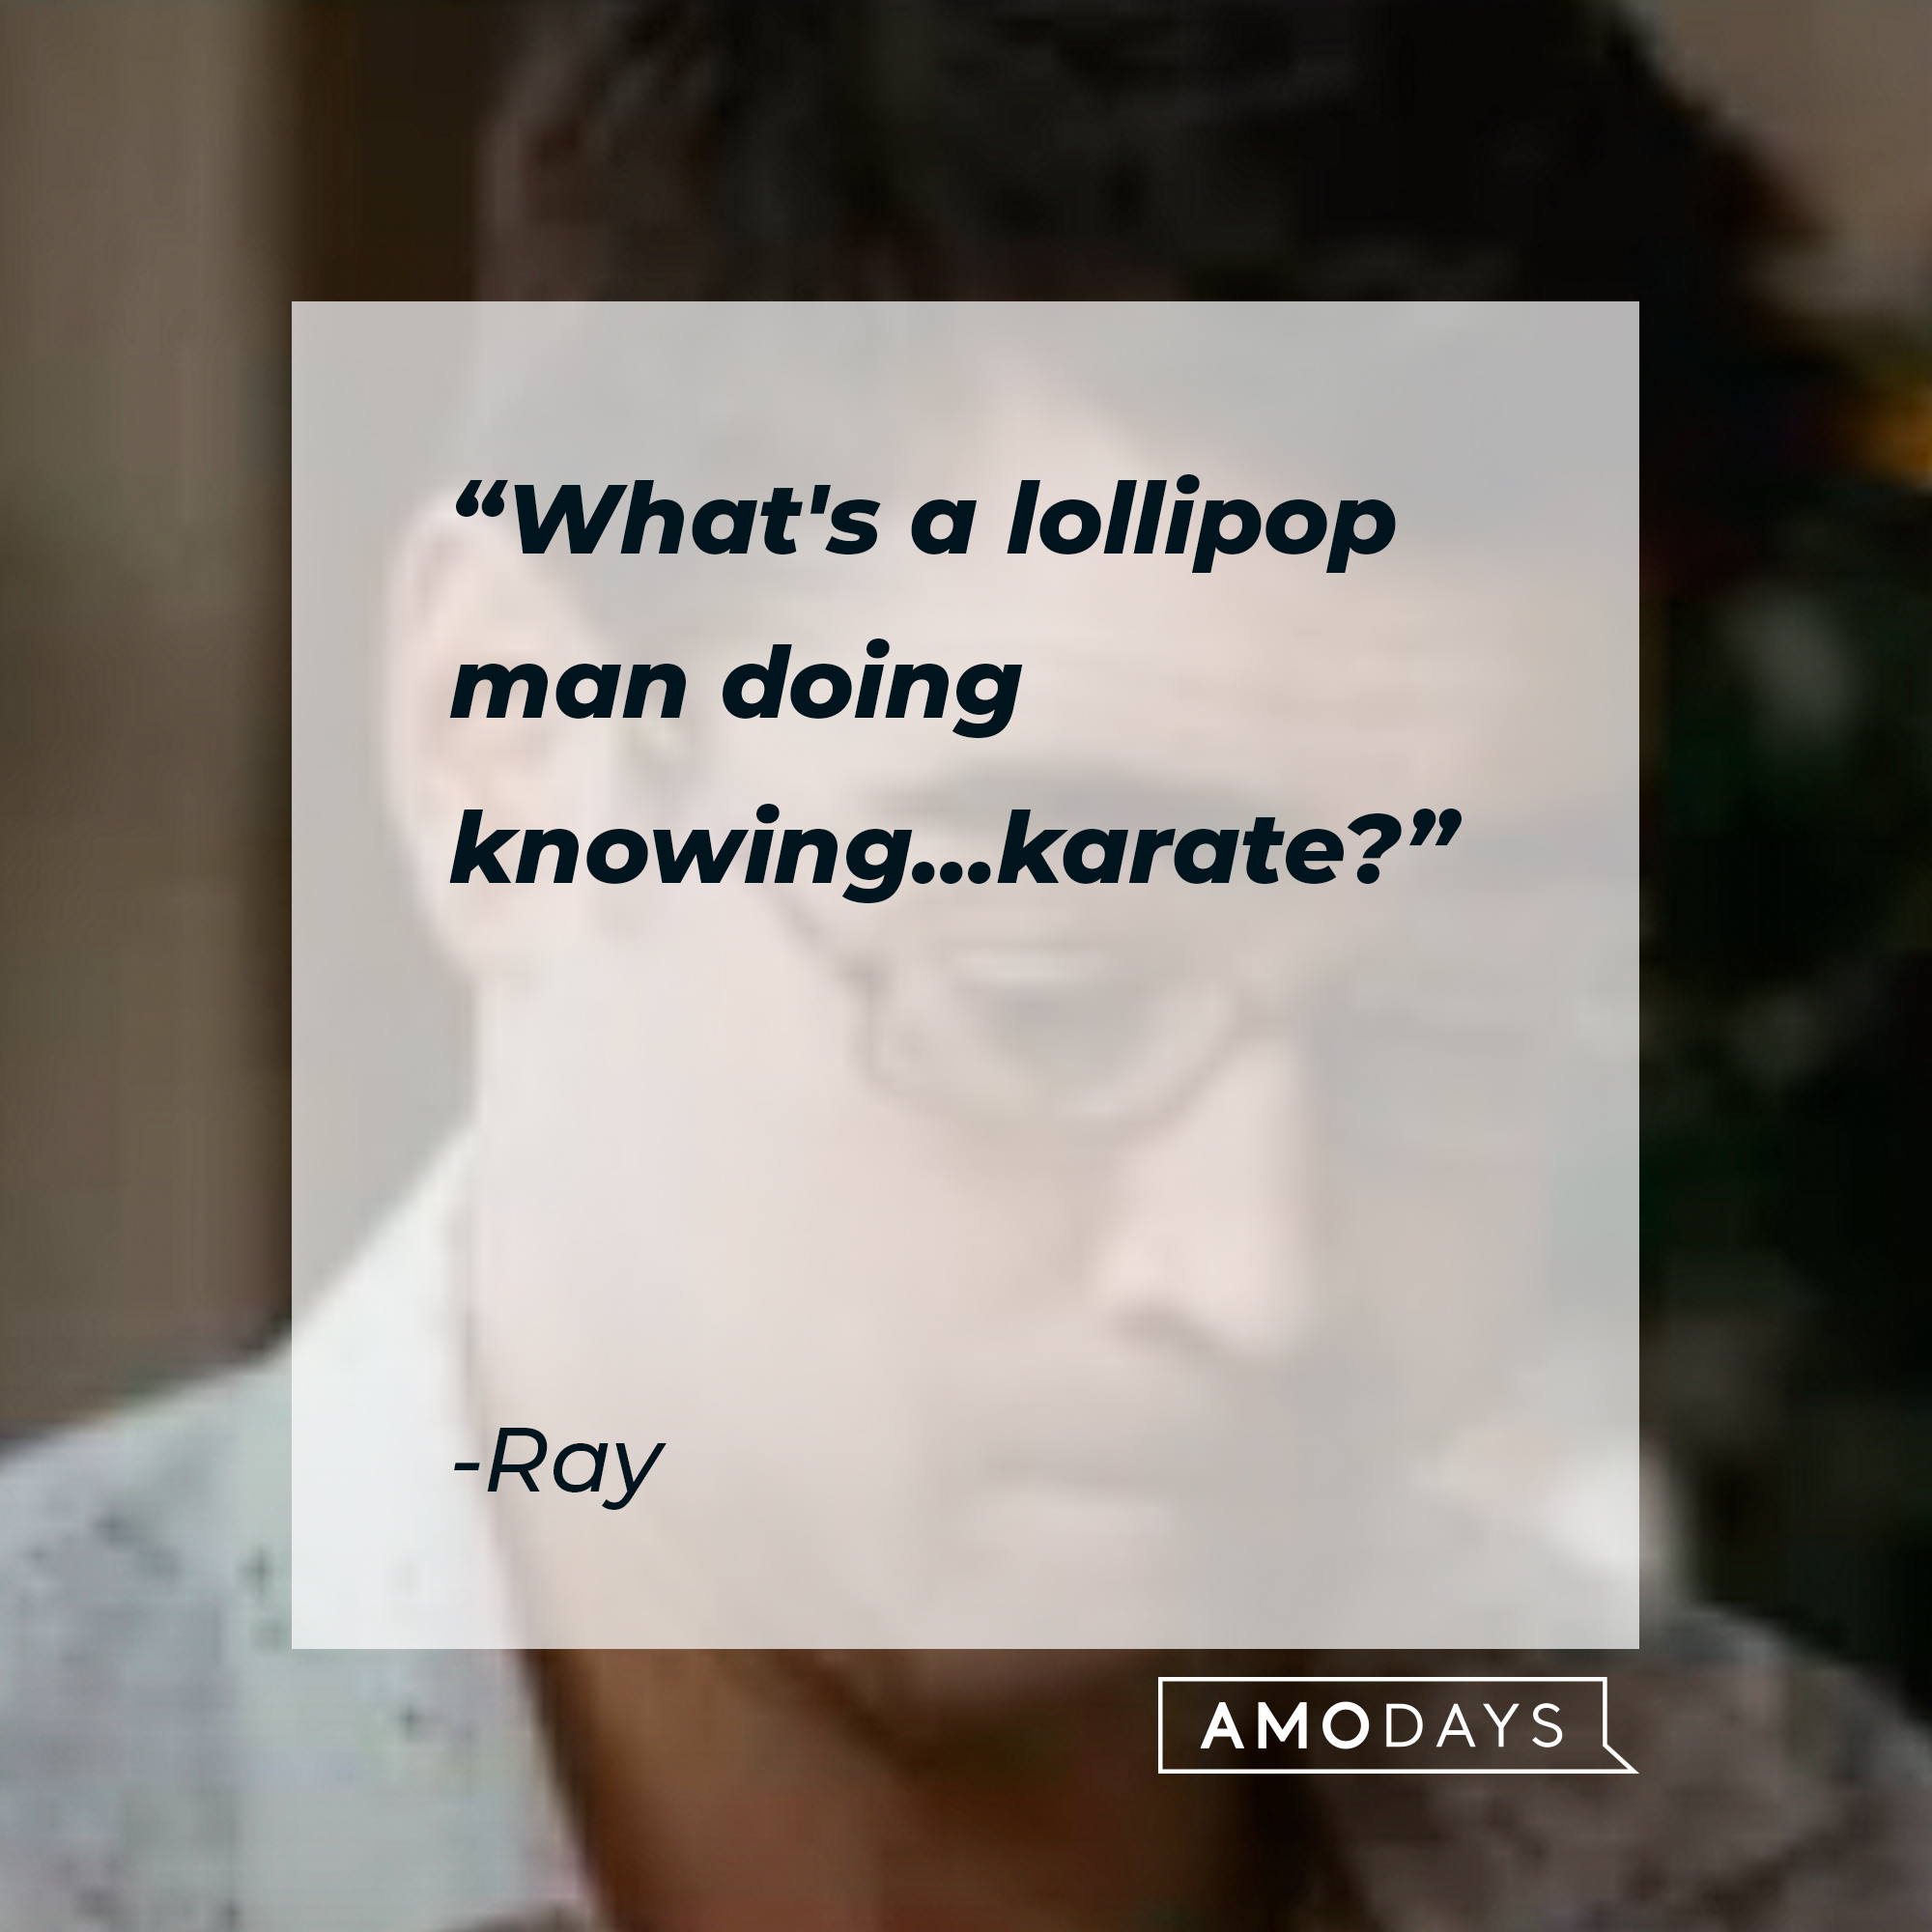 Ray, with his quote: “What's a lollipop man doing knowing ... karate?” | Source: Youtube.com/FocusFeatures